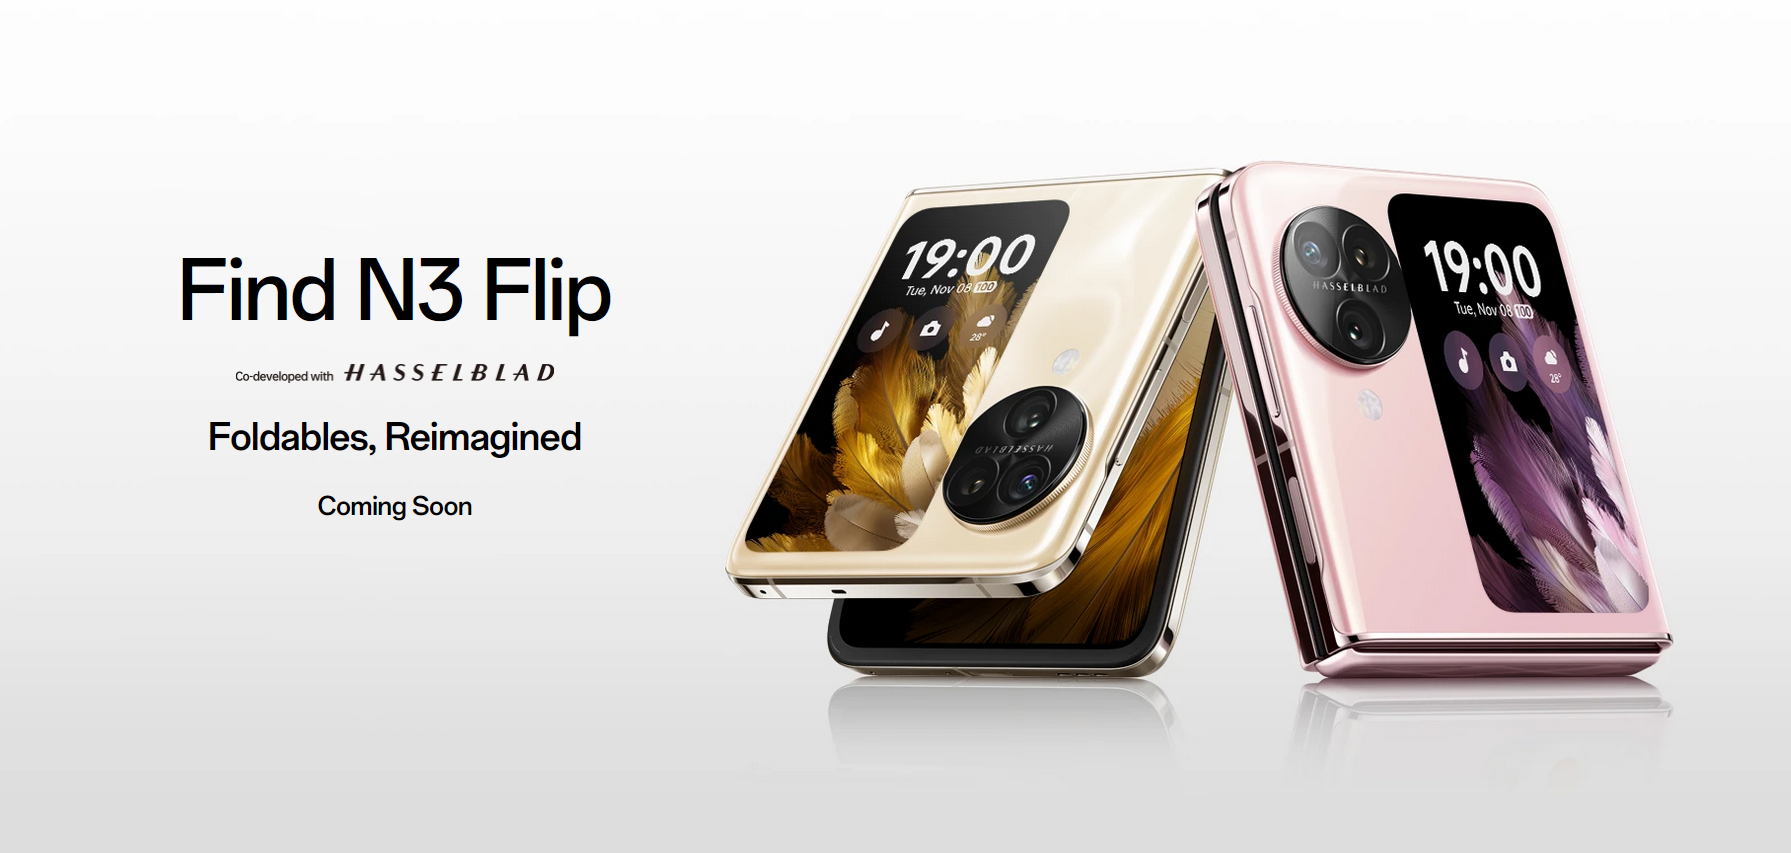 The Oppo Find N3 Flip is Making its International Debut 